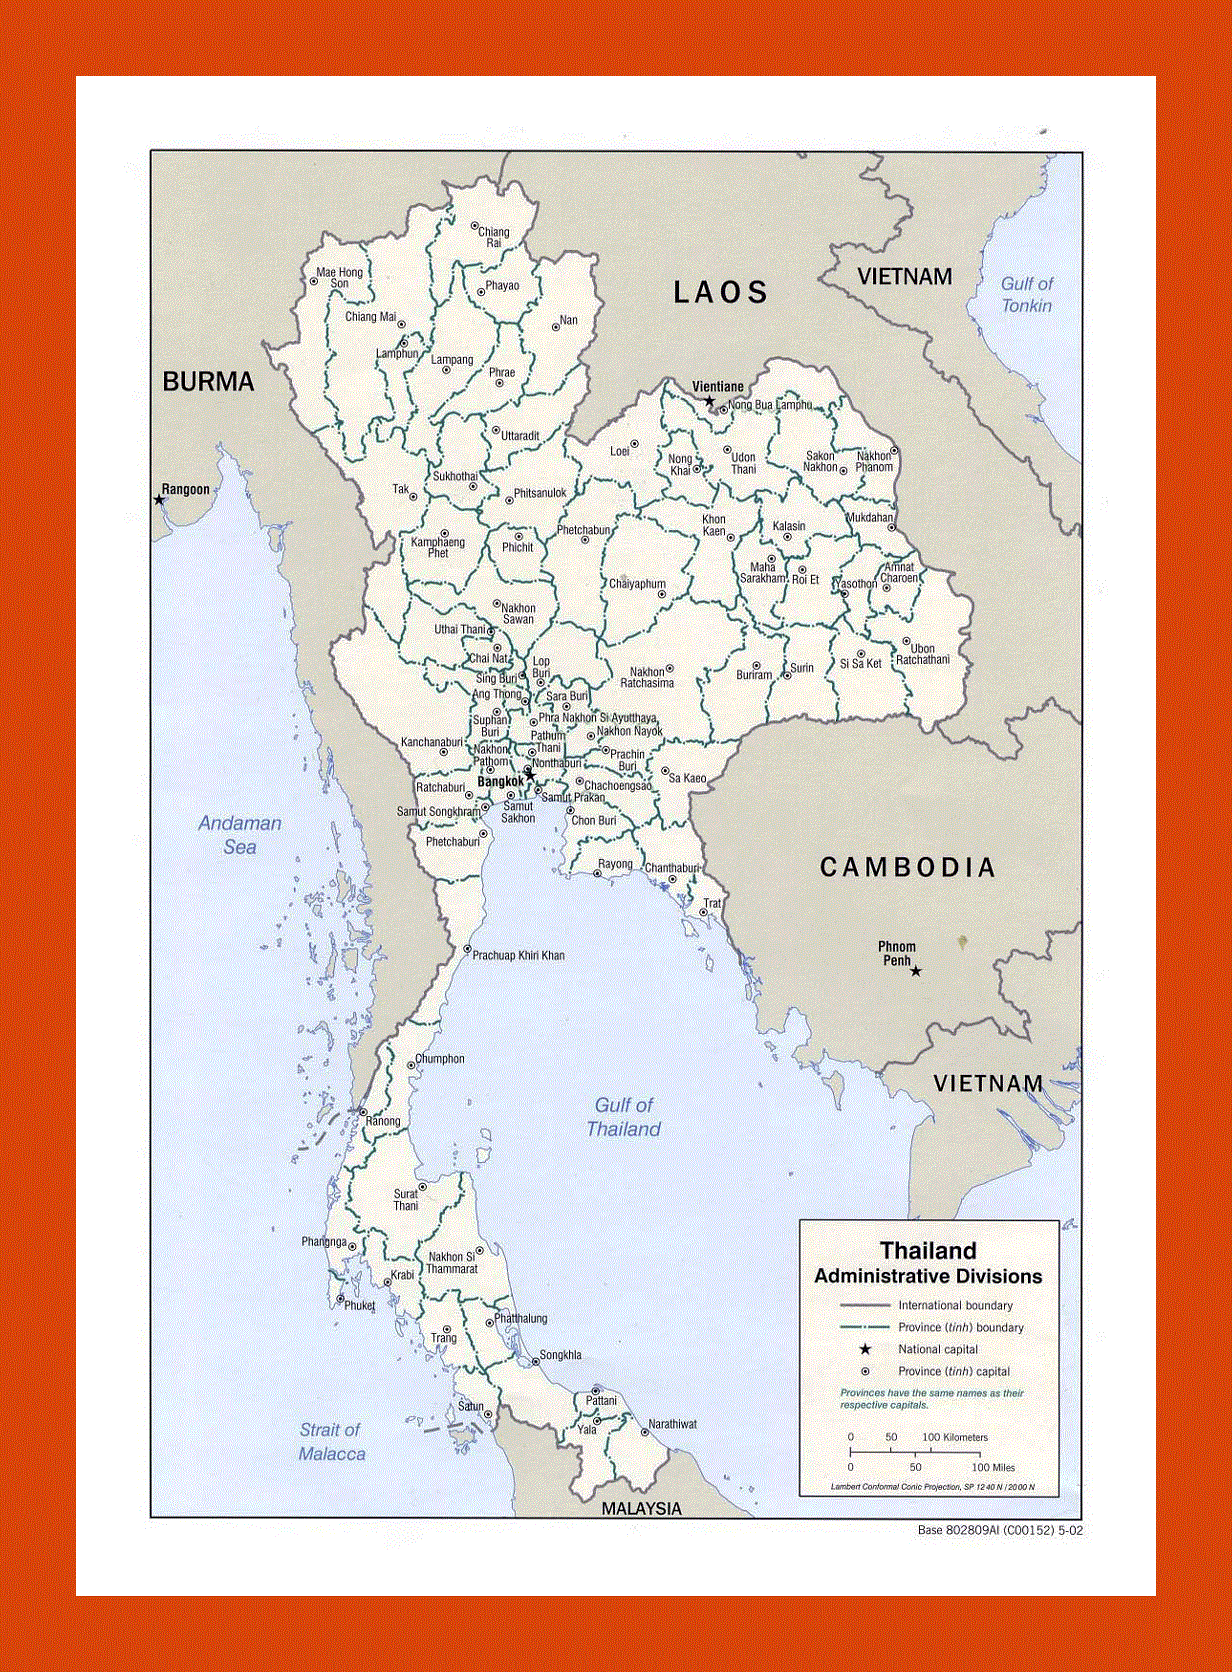 Administrative divisions map of Thailand - 2002